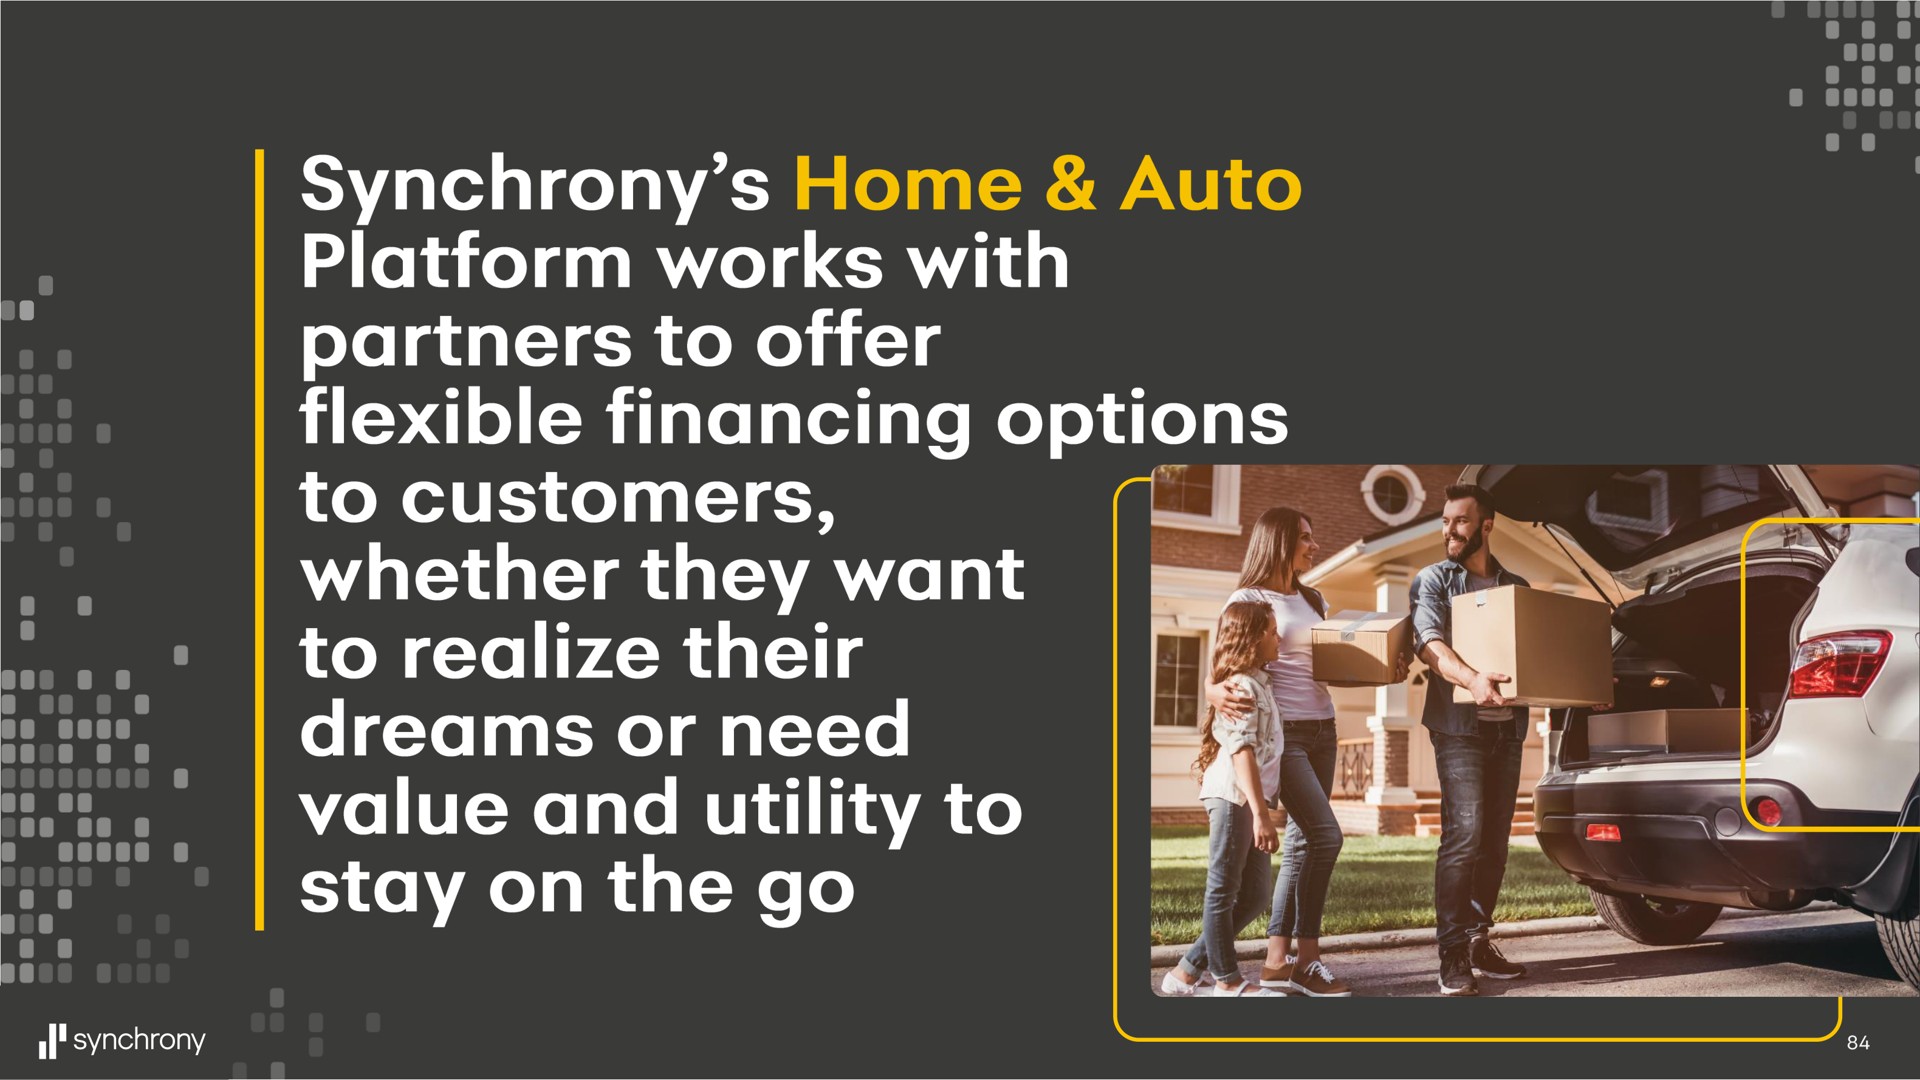 synchrony home auto platform works with partners to offer flexible financing options to customers whether they to realize their dreams or need value and utility to stay on the go | Synchrony Financial